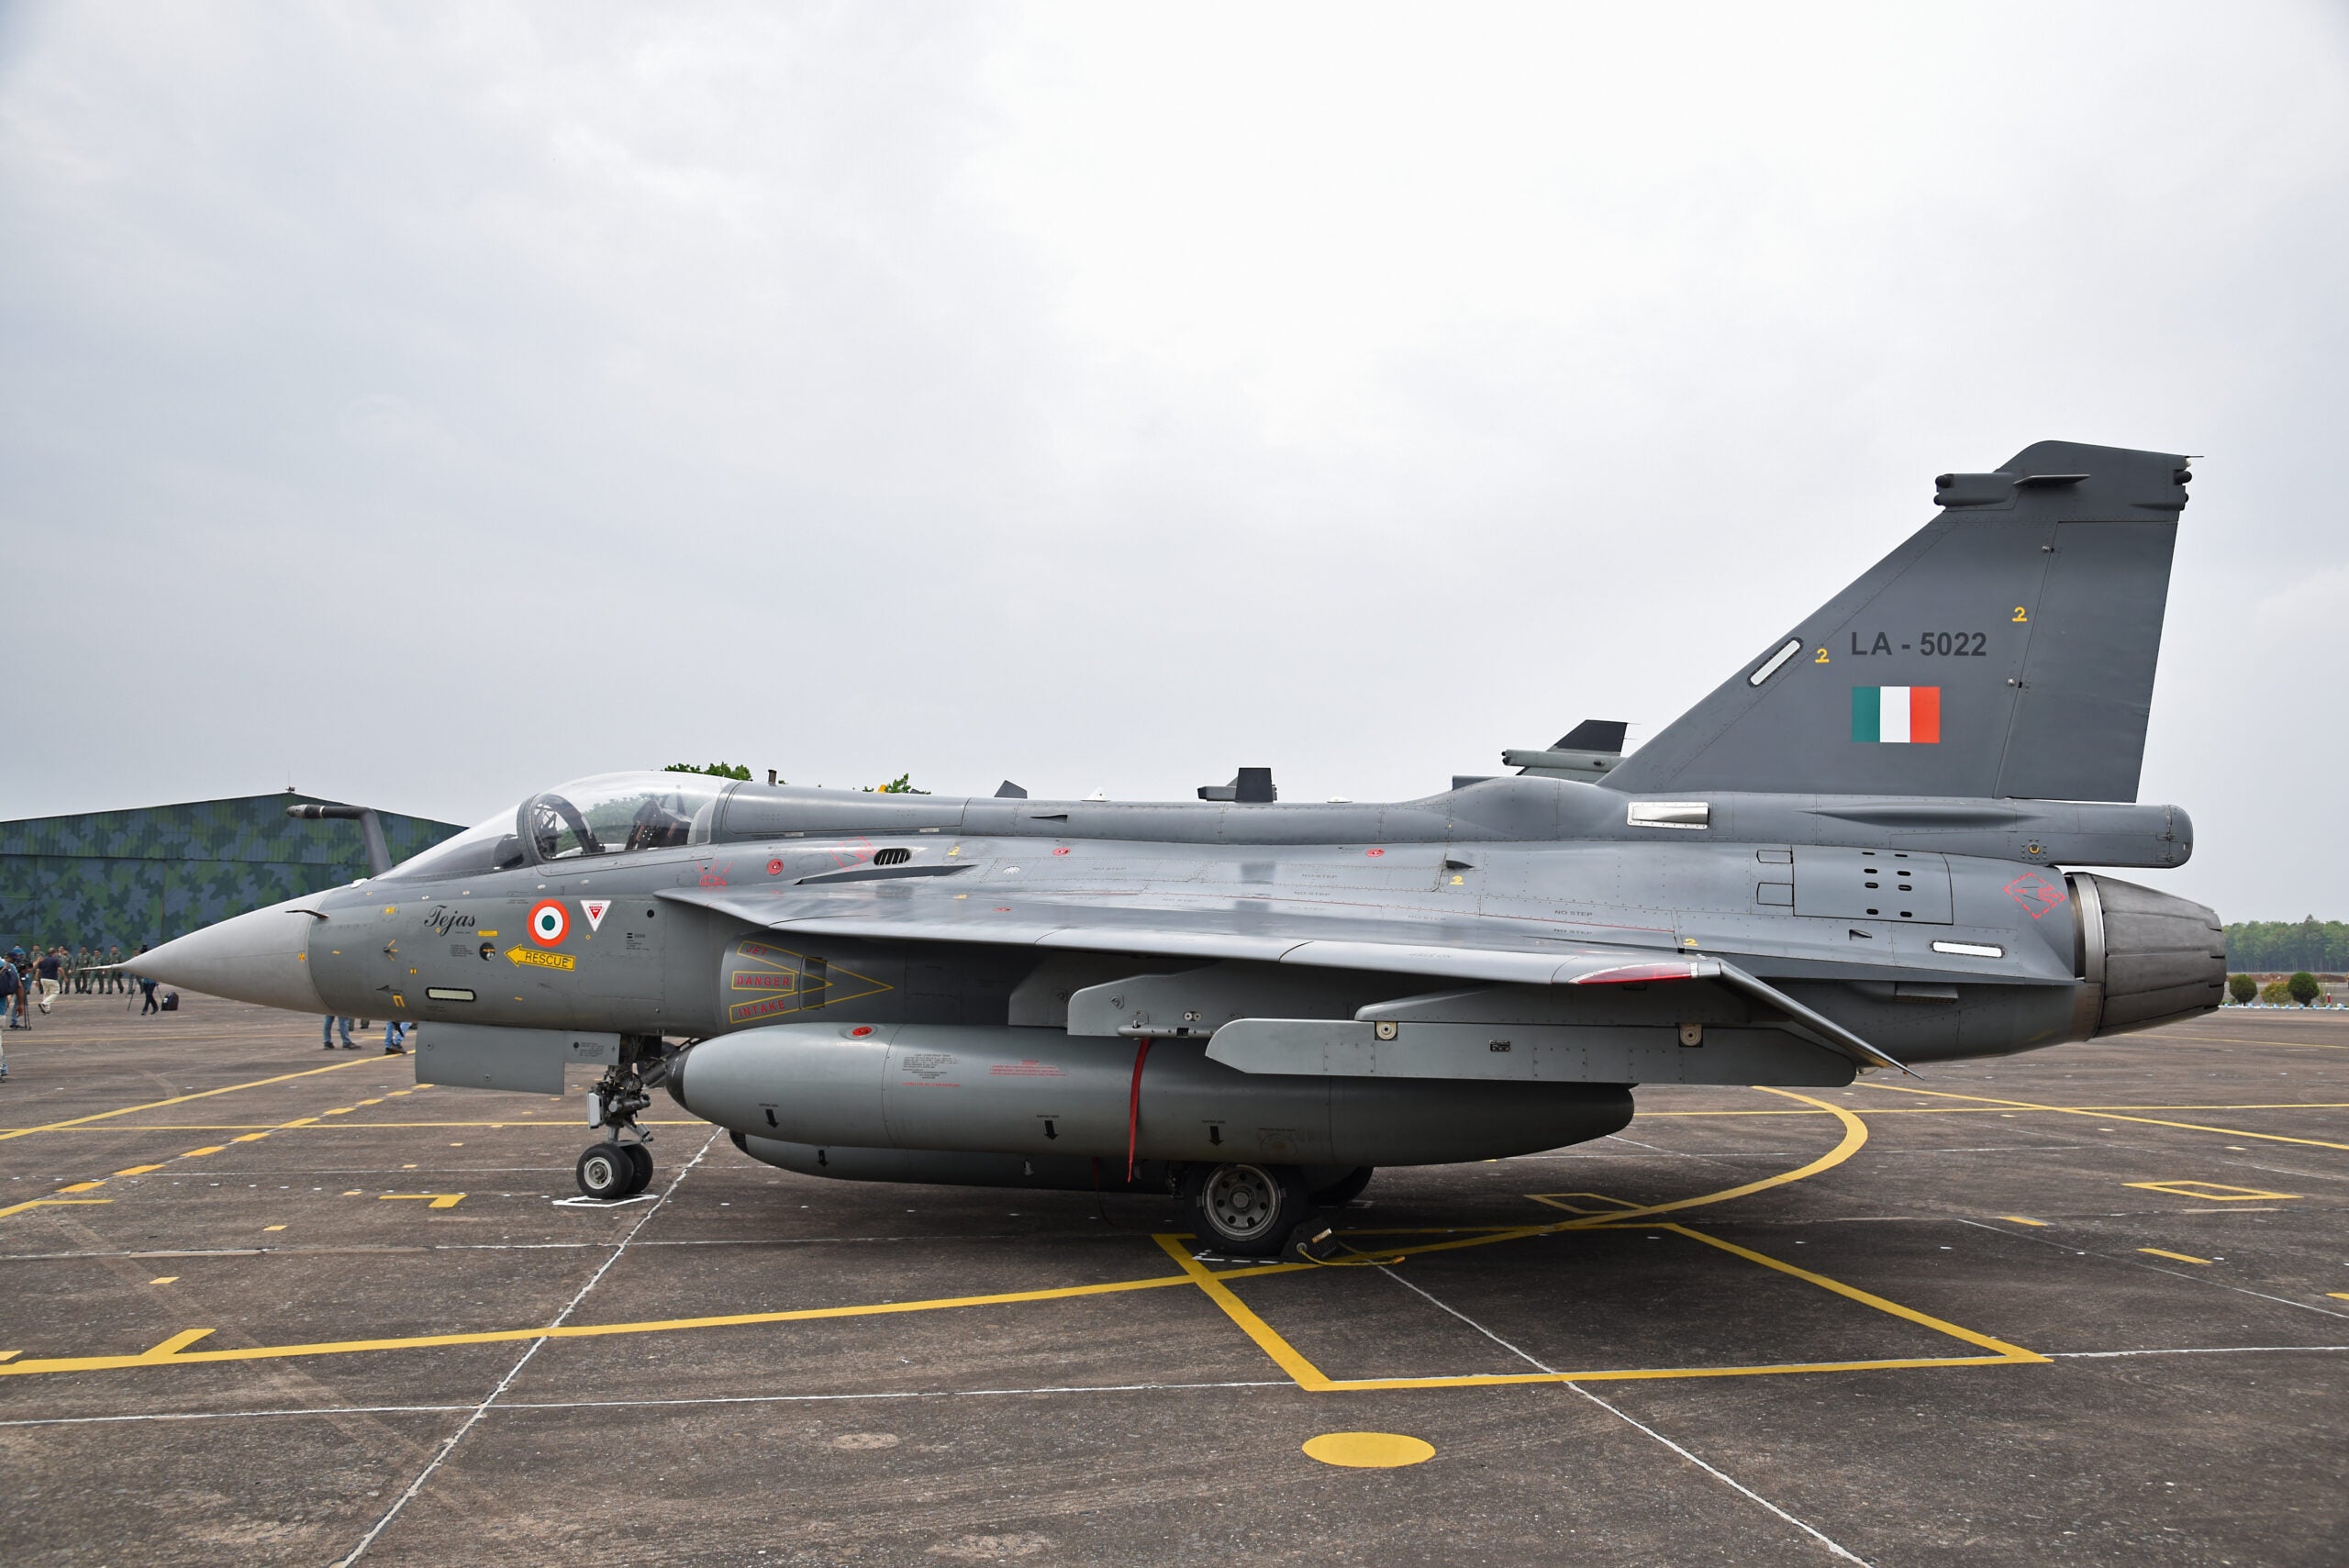 The Indian Air Force (IAF) is set to receive its first domestically-produced combat aircraft with beyond-visual range strike capabilities next February, the defence ministry said on Friday. The delivery of Tejas LCA-Mk-1A aircraft by Hindustan Aeronautics Limited (HAL) is expected to begin in February 2024, the ministry said in a statement, as it marked the seventh anniversary of the induction of the made-in-India fighter jet. The 83 LCA Mk-1A aircraft - contracted by the defence ministry in 2021 at a price of Rs 47,000 crore - will also feature active electronically steered radar, an updated electronic warfare suite and a beyond-visual range missile system. This picture was taken on April 24, 2023 at the air force station in Kalaikunda, around 170 km west of Kolkata, India. (Photo by Debajyoti Chakraborty/NurPhoto via Getty Images)